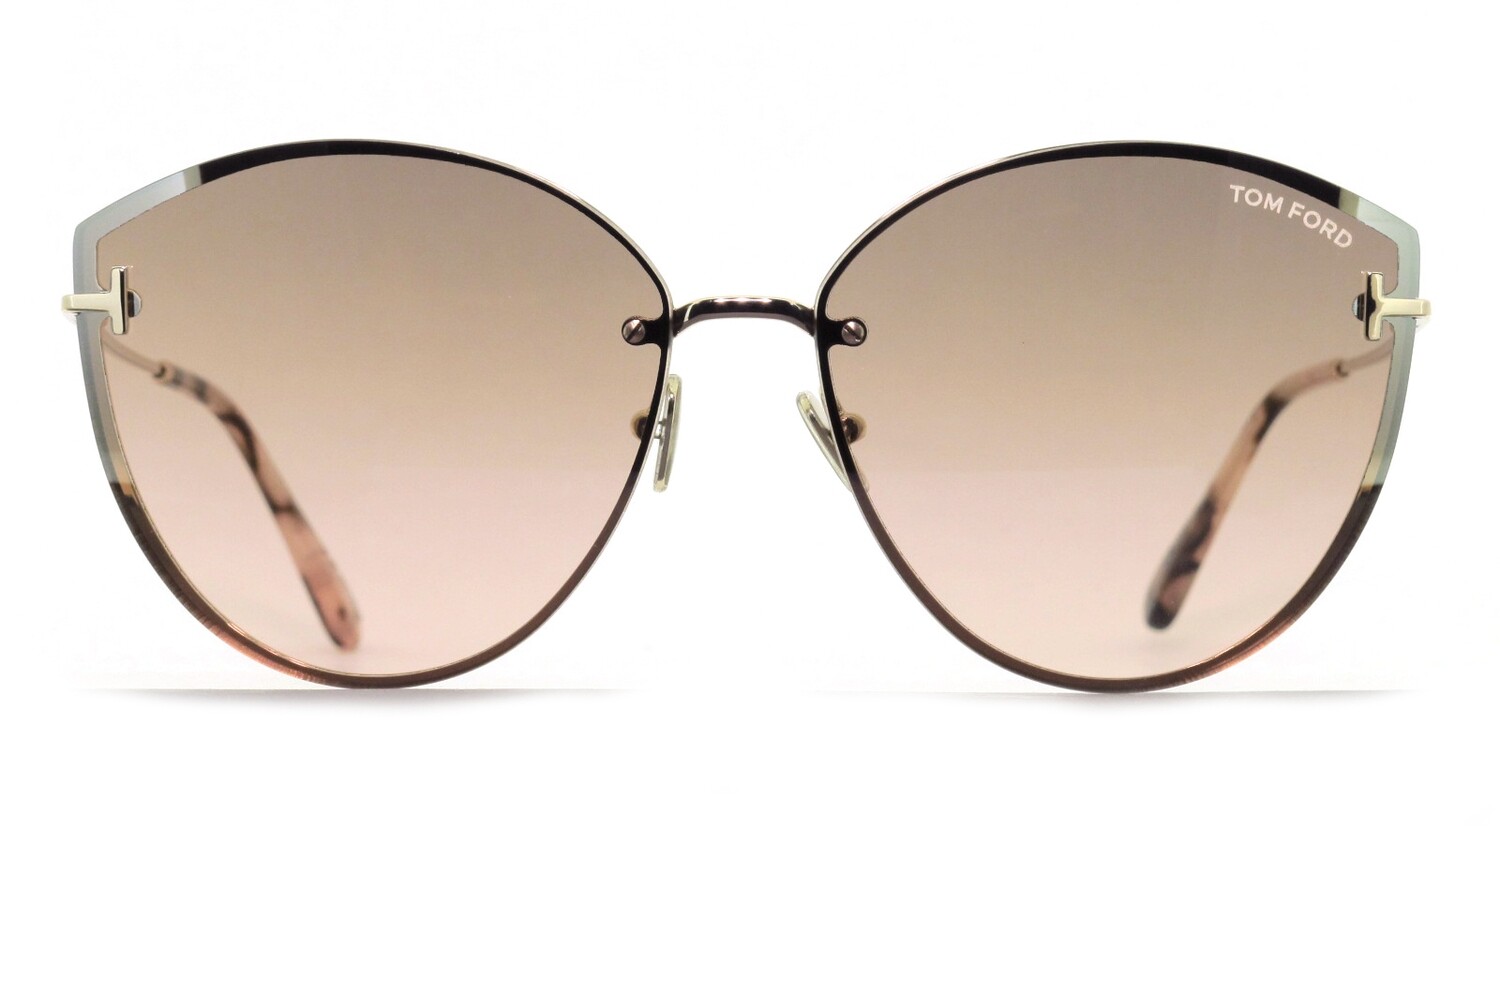 Evangelina TF1106 by Tom Ford